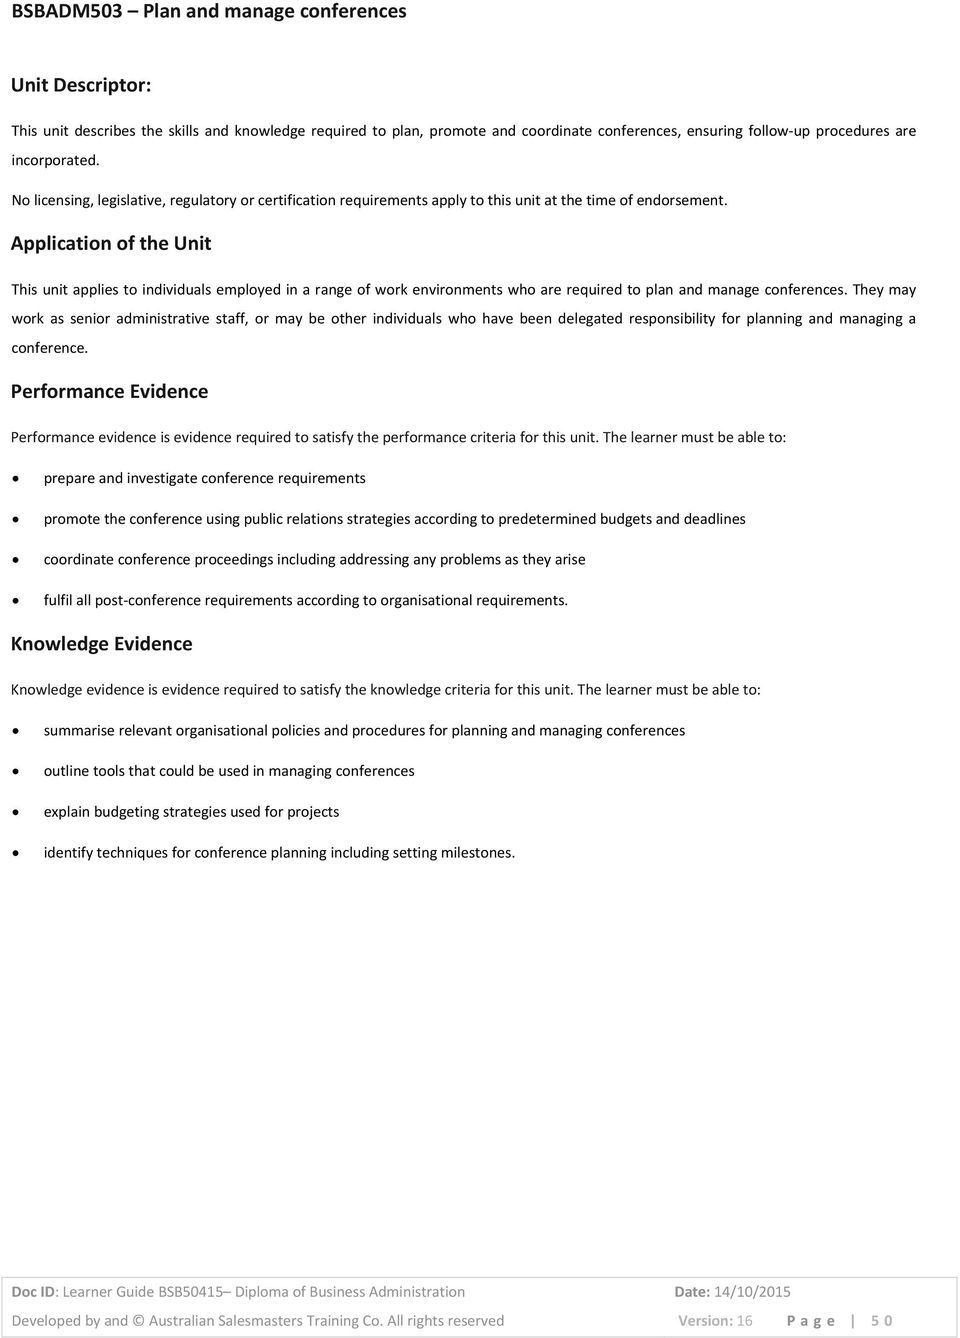 Application of the Unit This unit applies to individuals employed in a range of work environments who are required to plan and manage conferences.